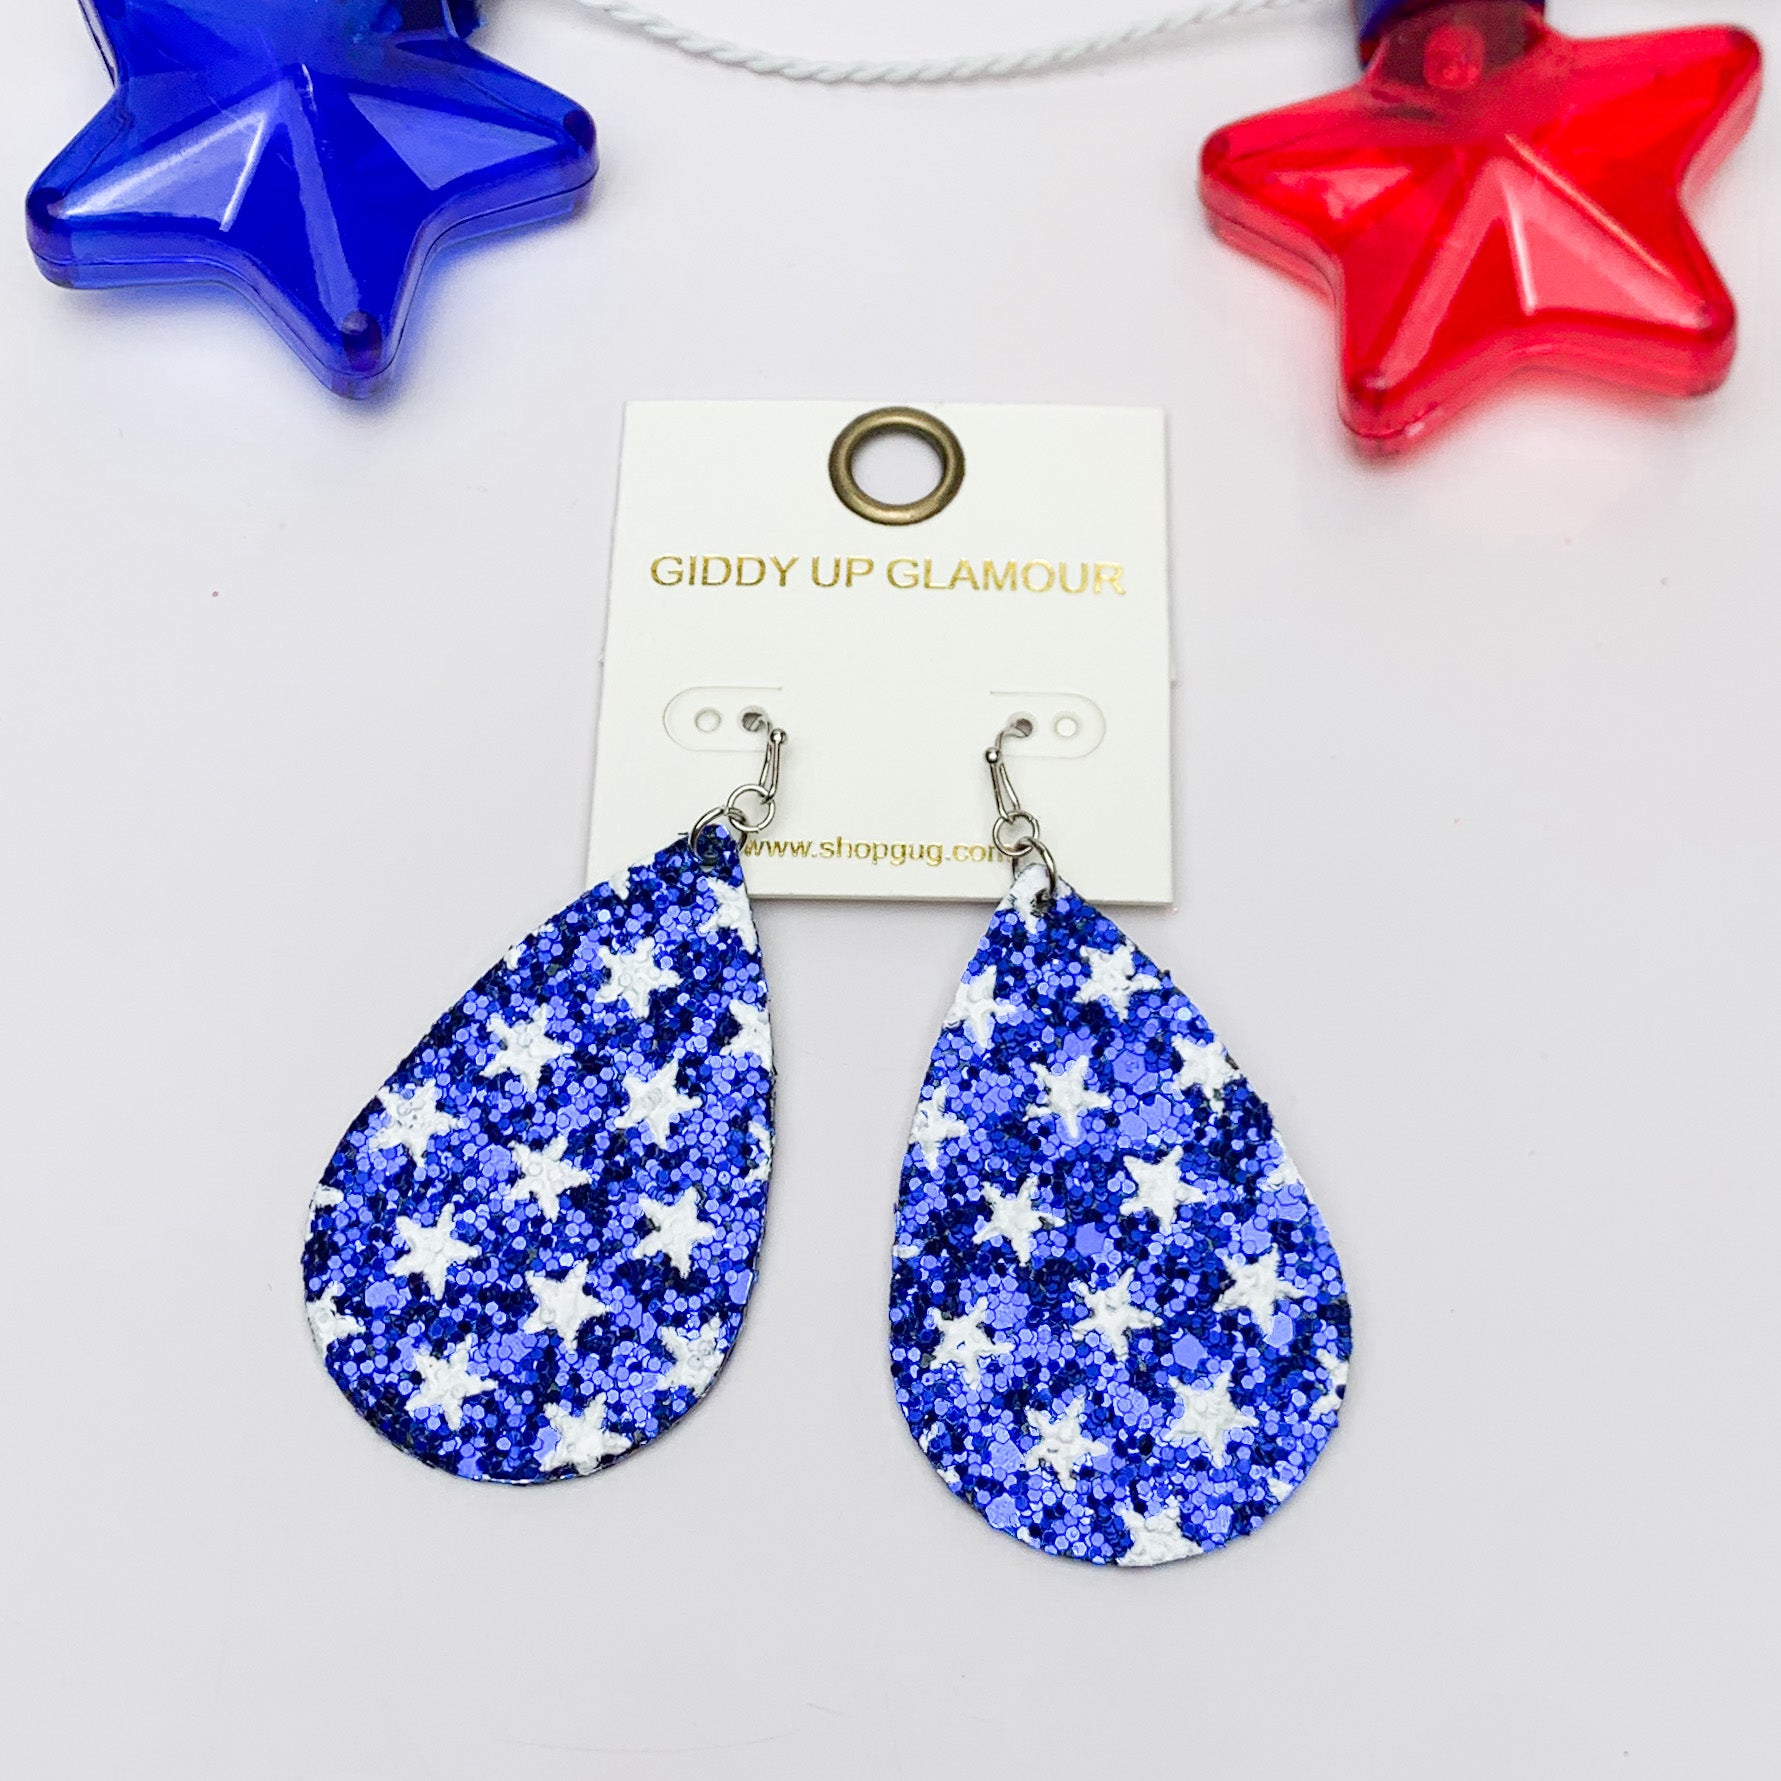 Festive Sparkly Blue Drop Earrings Filled With White Stars. Pictured on a white background with a red and blue star behind the earrings.